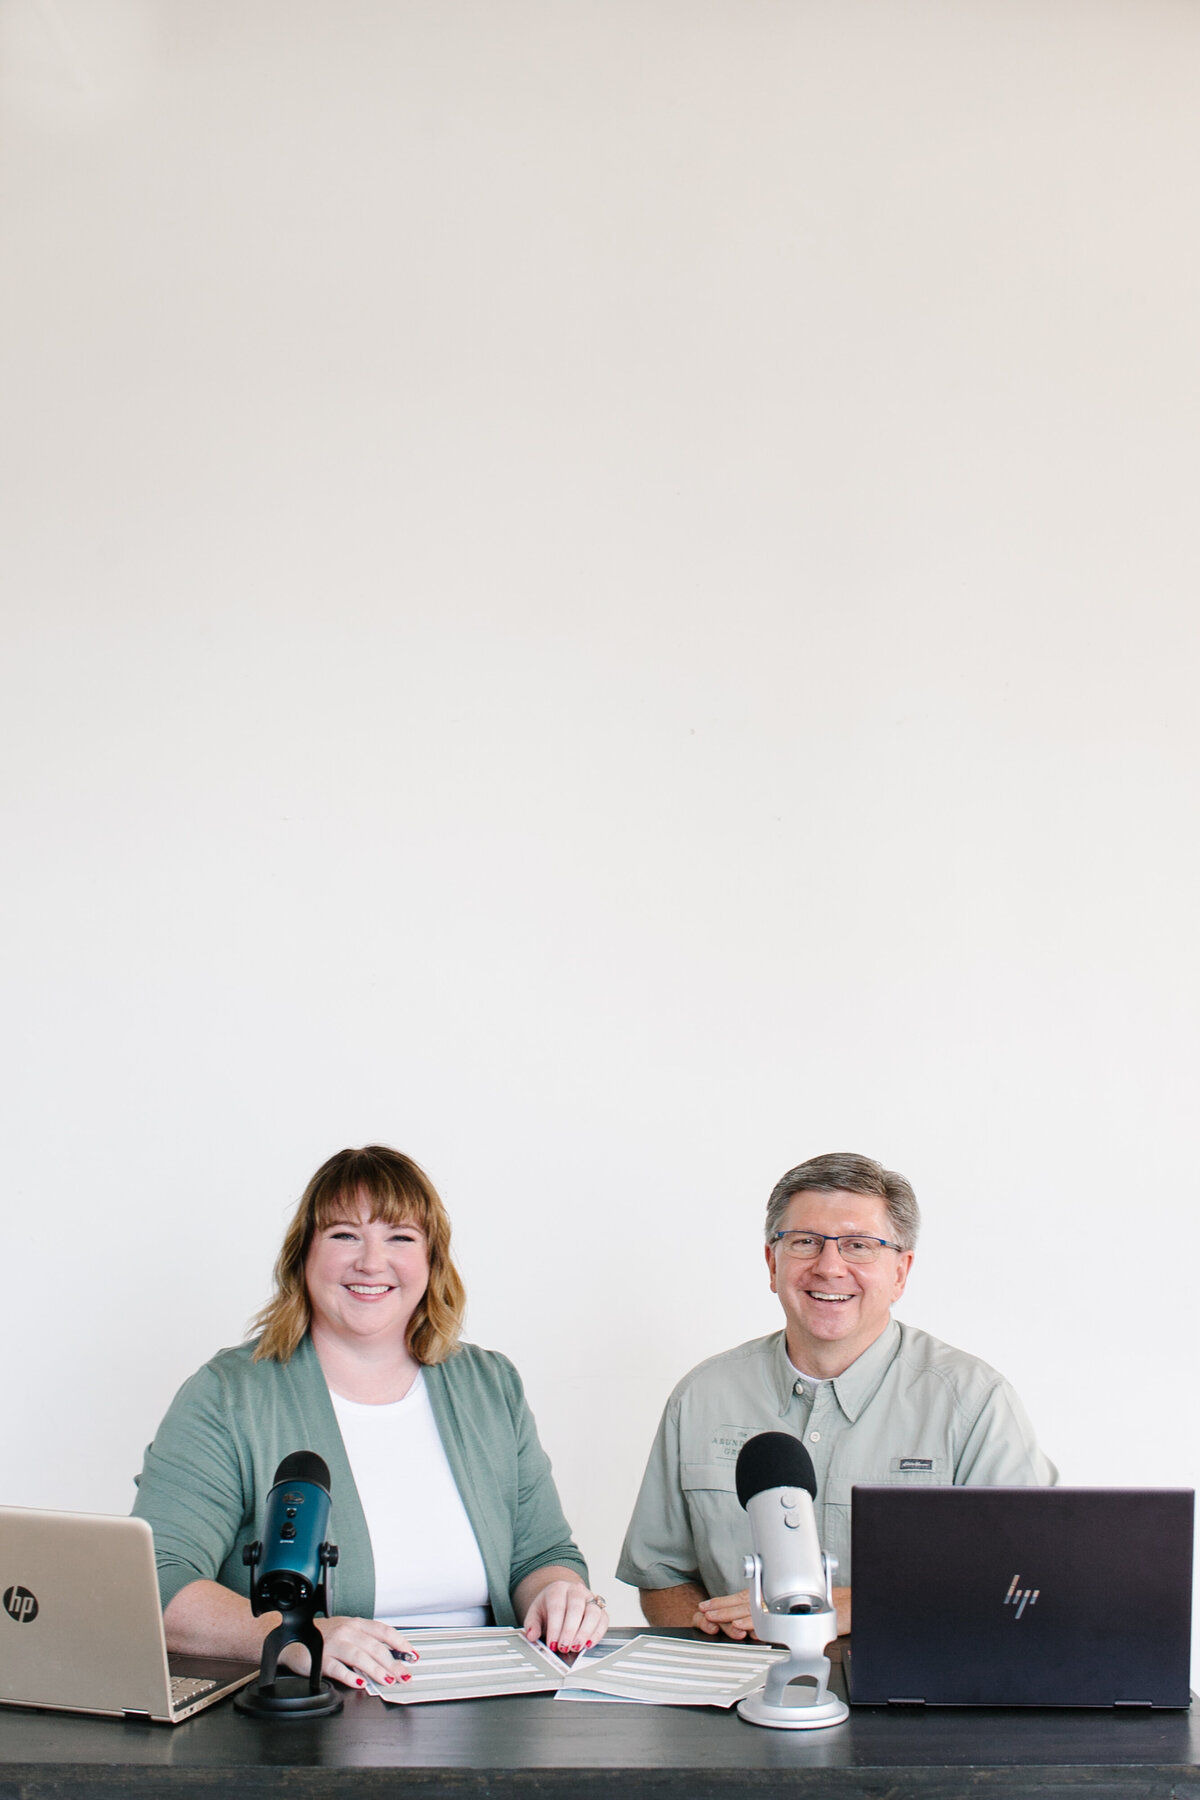 The Abundance Group founders, Ashley Ebert and Dale Henry, smile together behind their desk